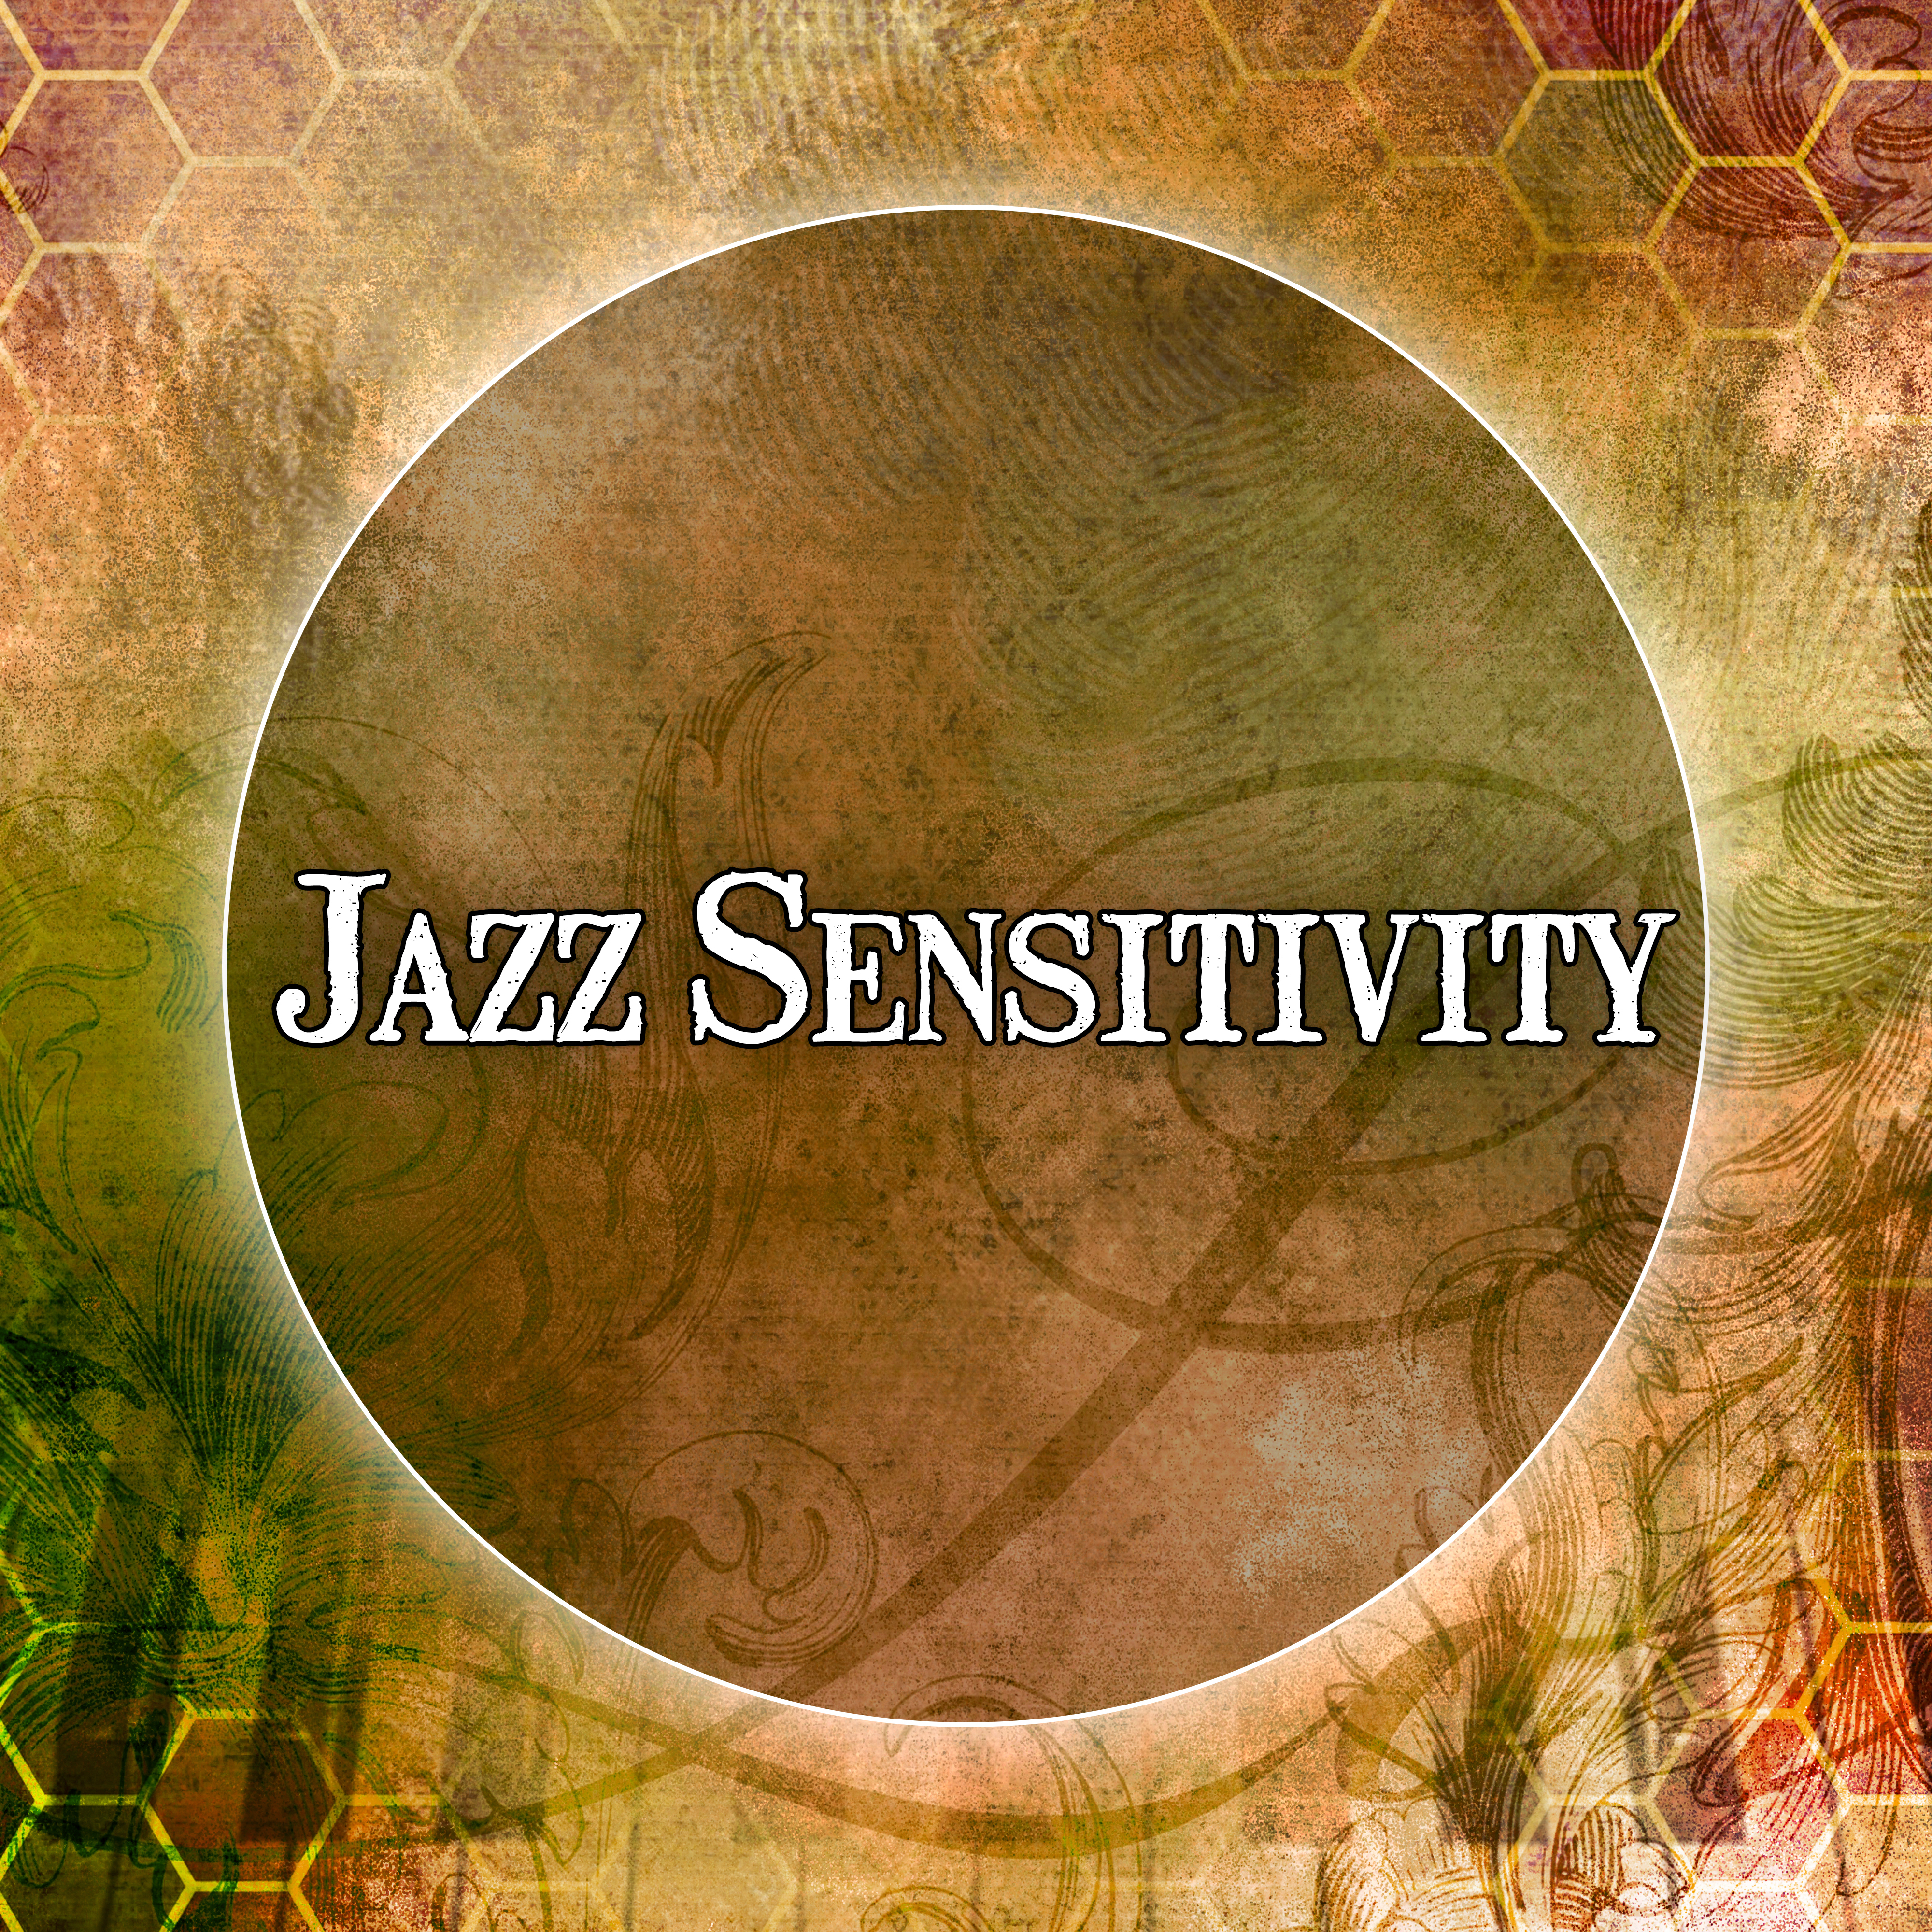 Jazz Sensitivity  Peaceful Piano Jazz Music for Every Moment of Life, Sensual Vibes and Jazz Music for Good Mood